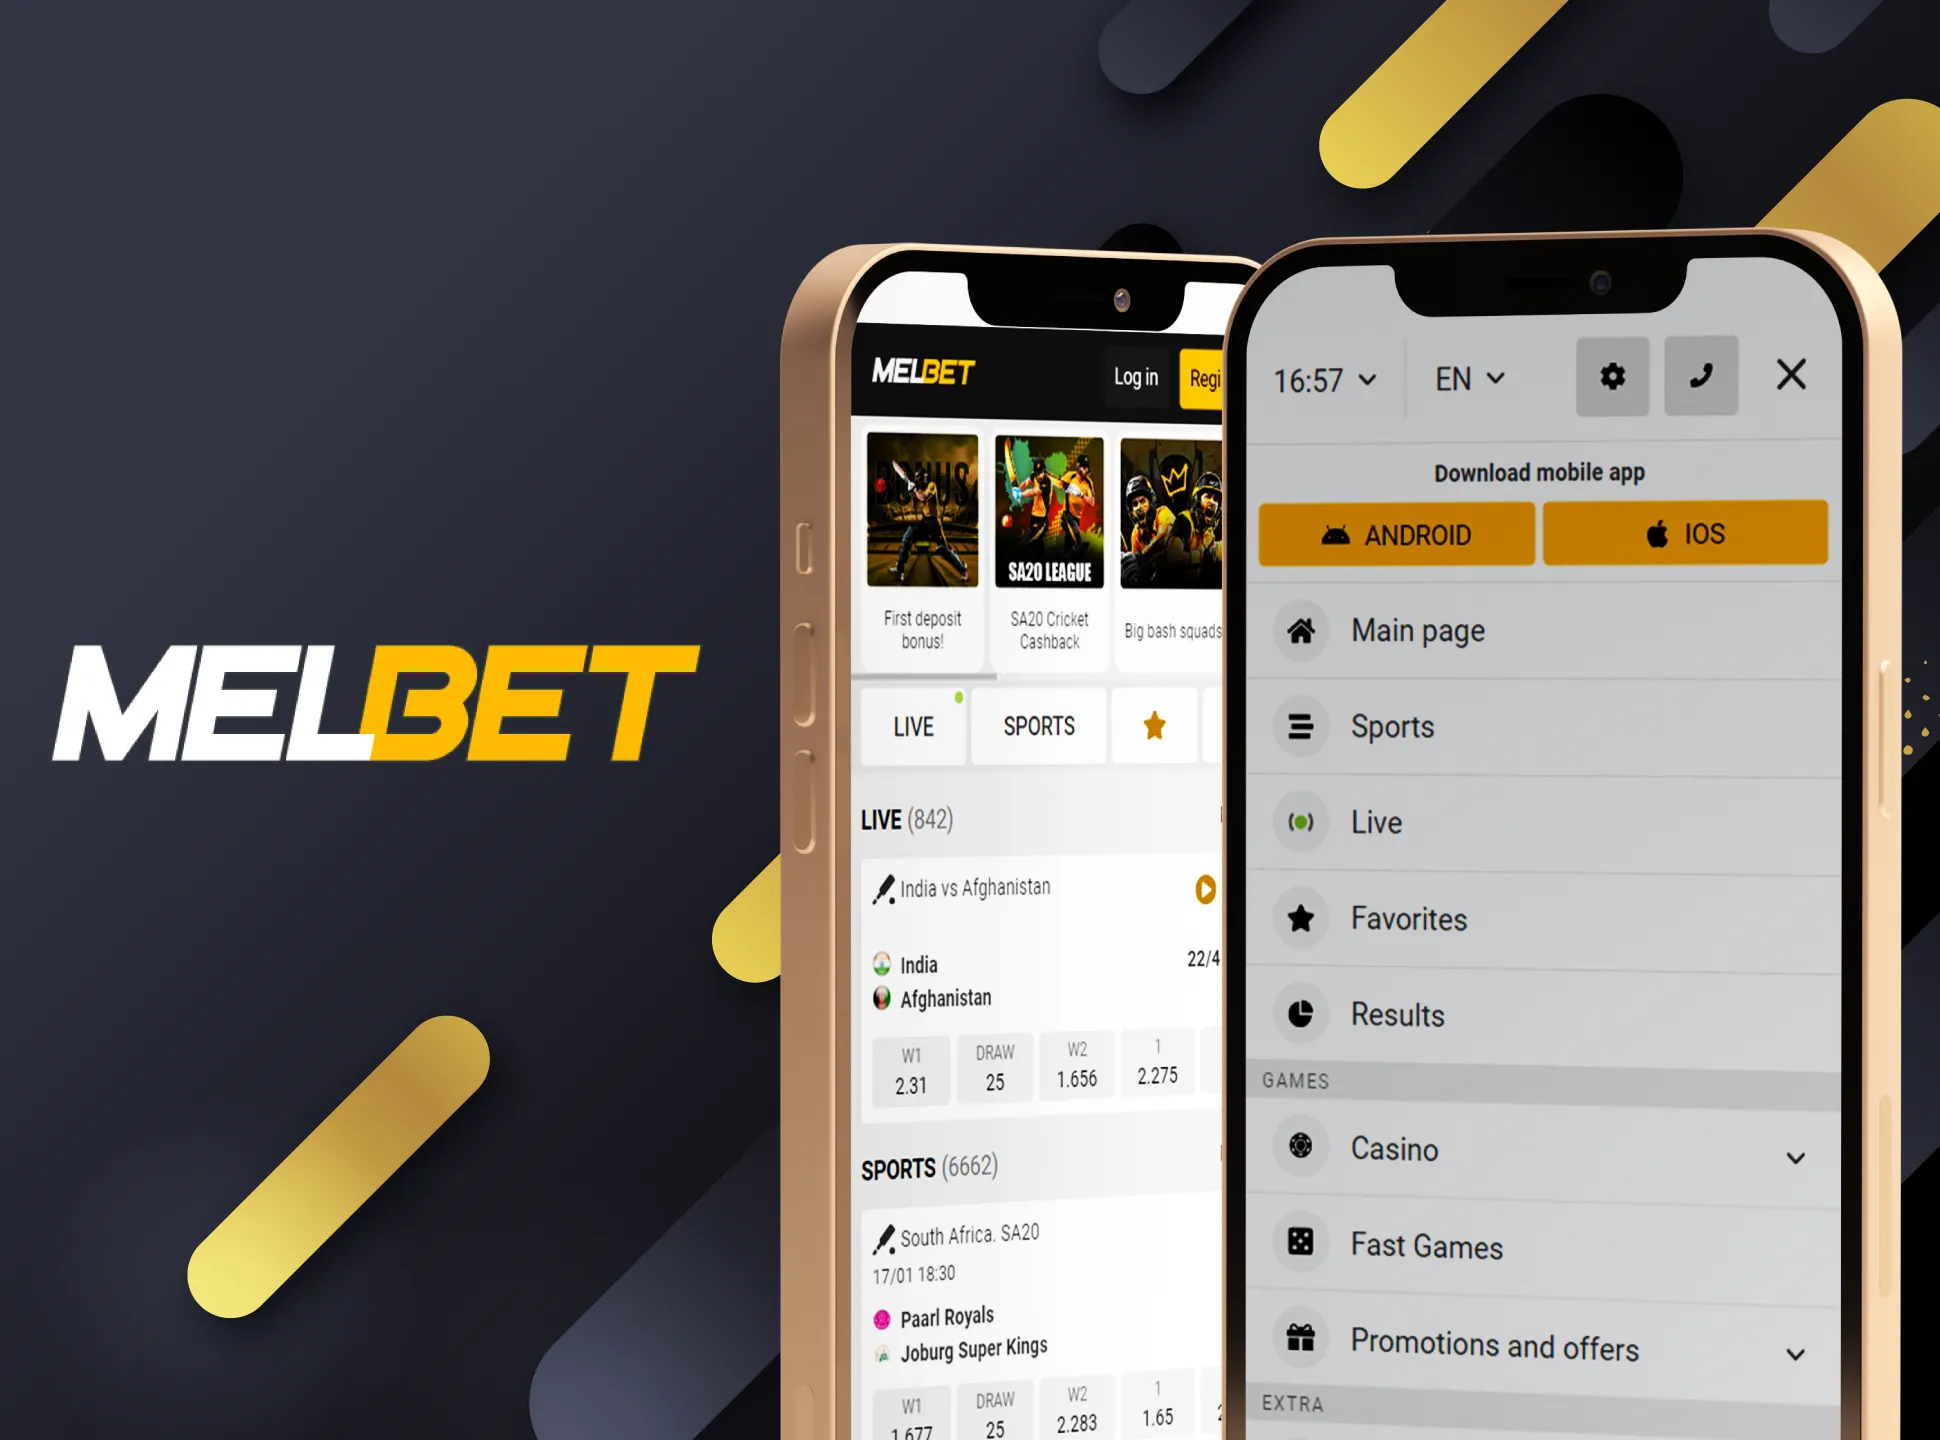 The Melbet app has all the necessary features for easy and fast betting.